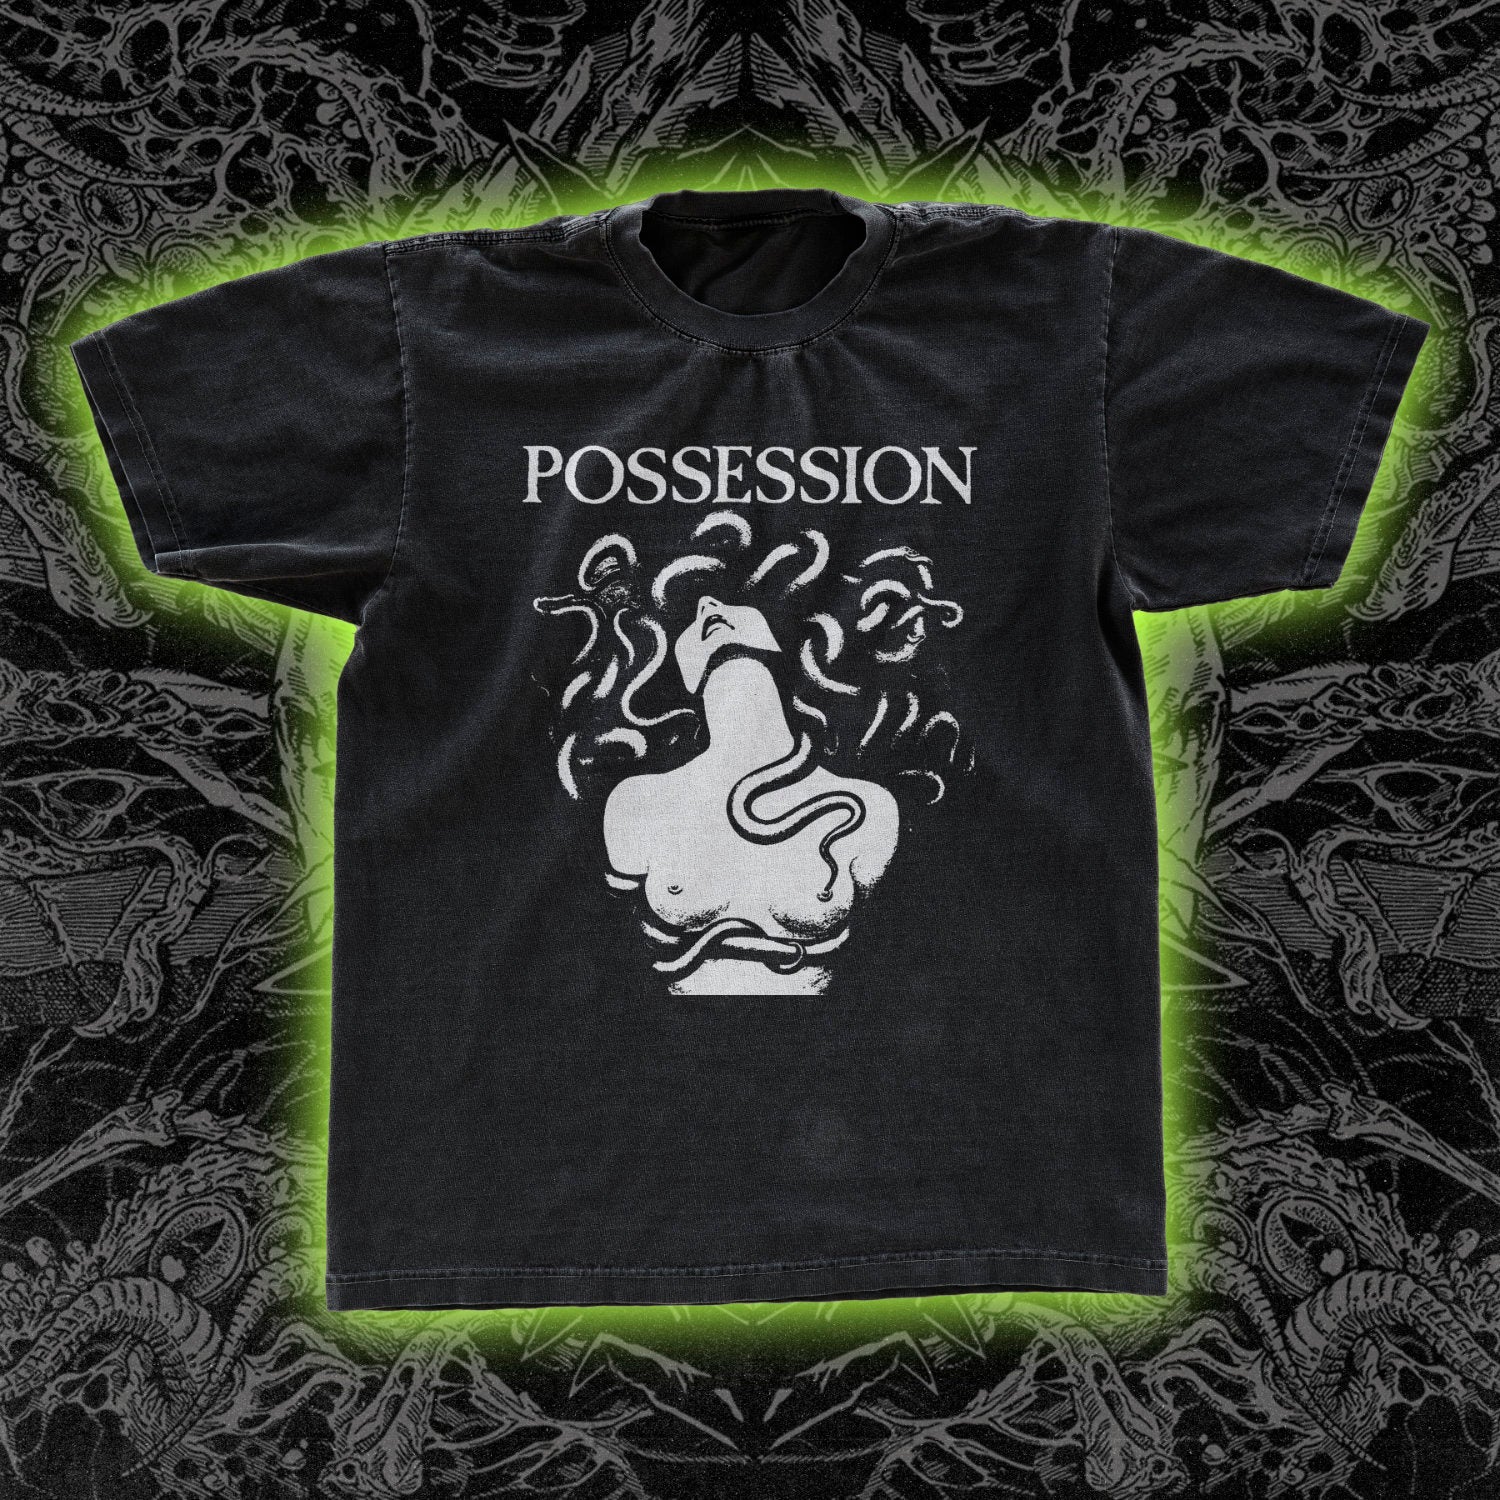 Possession 1981 Film | Occult & Obscure Clothing | Night Channels